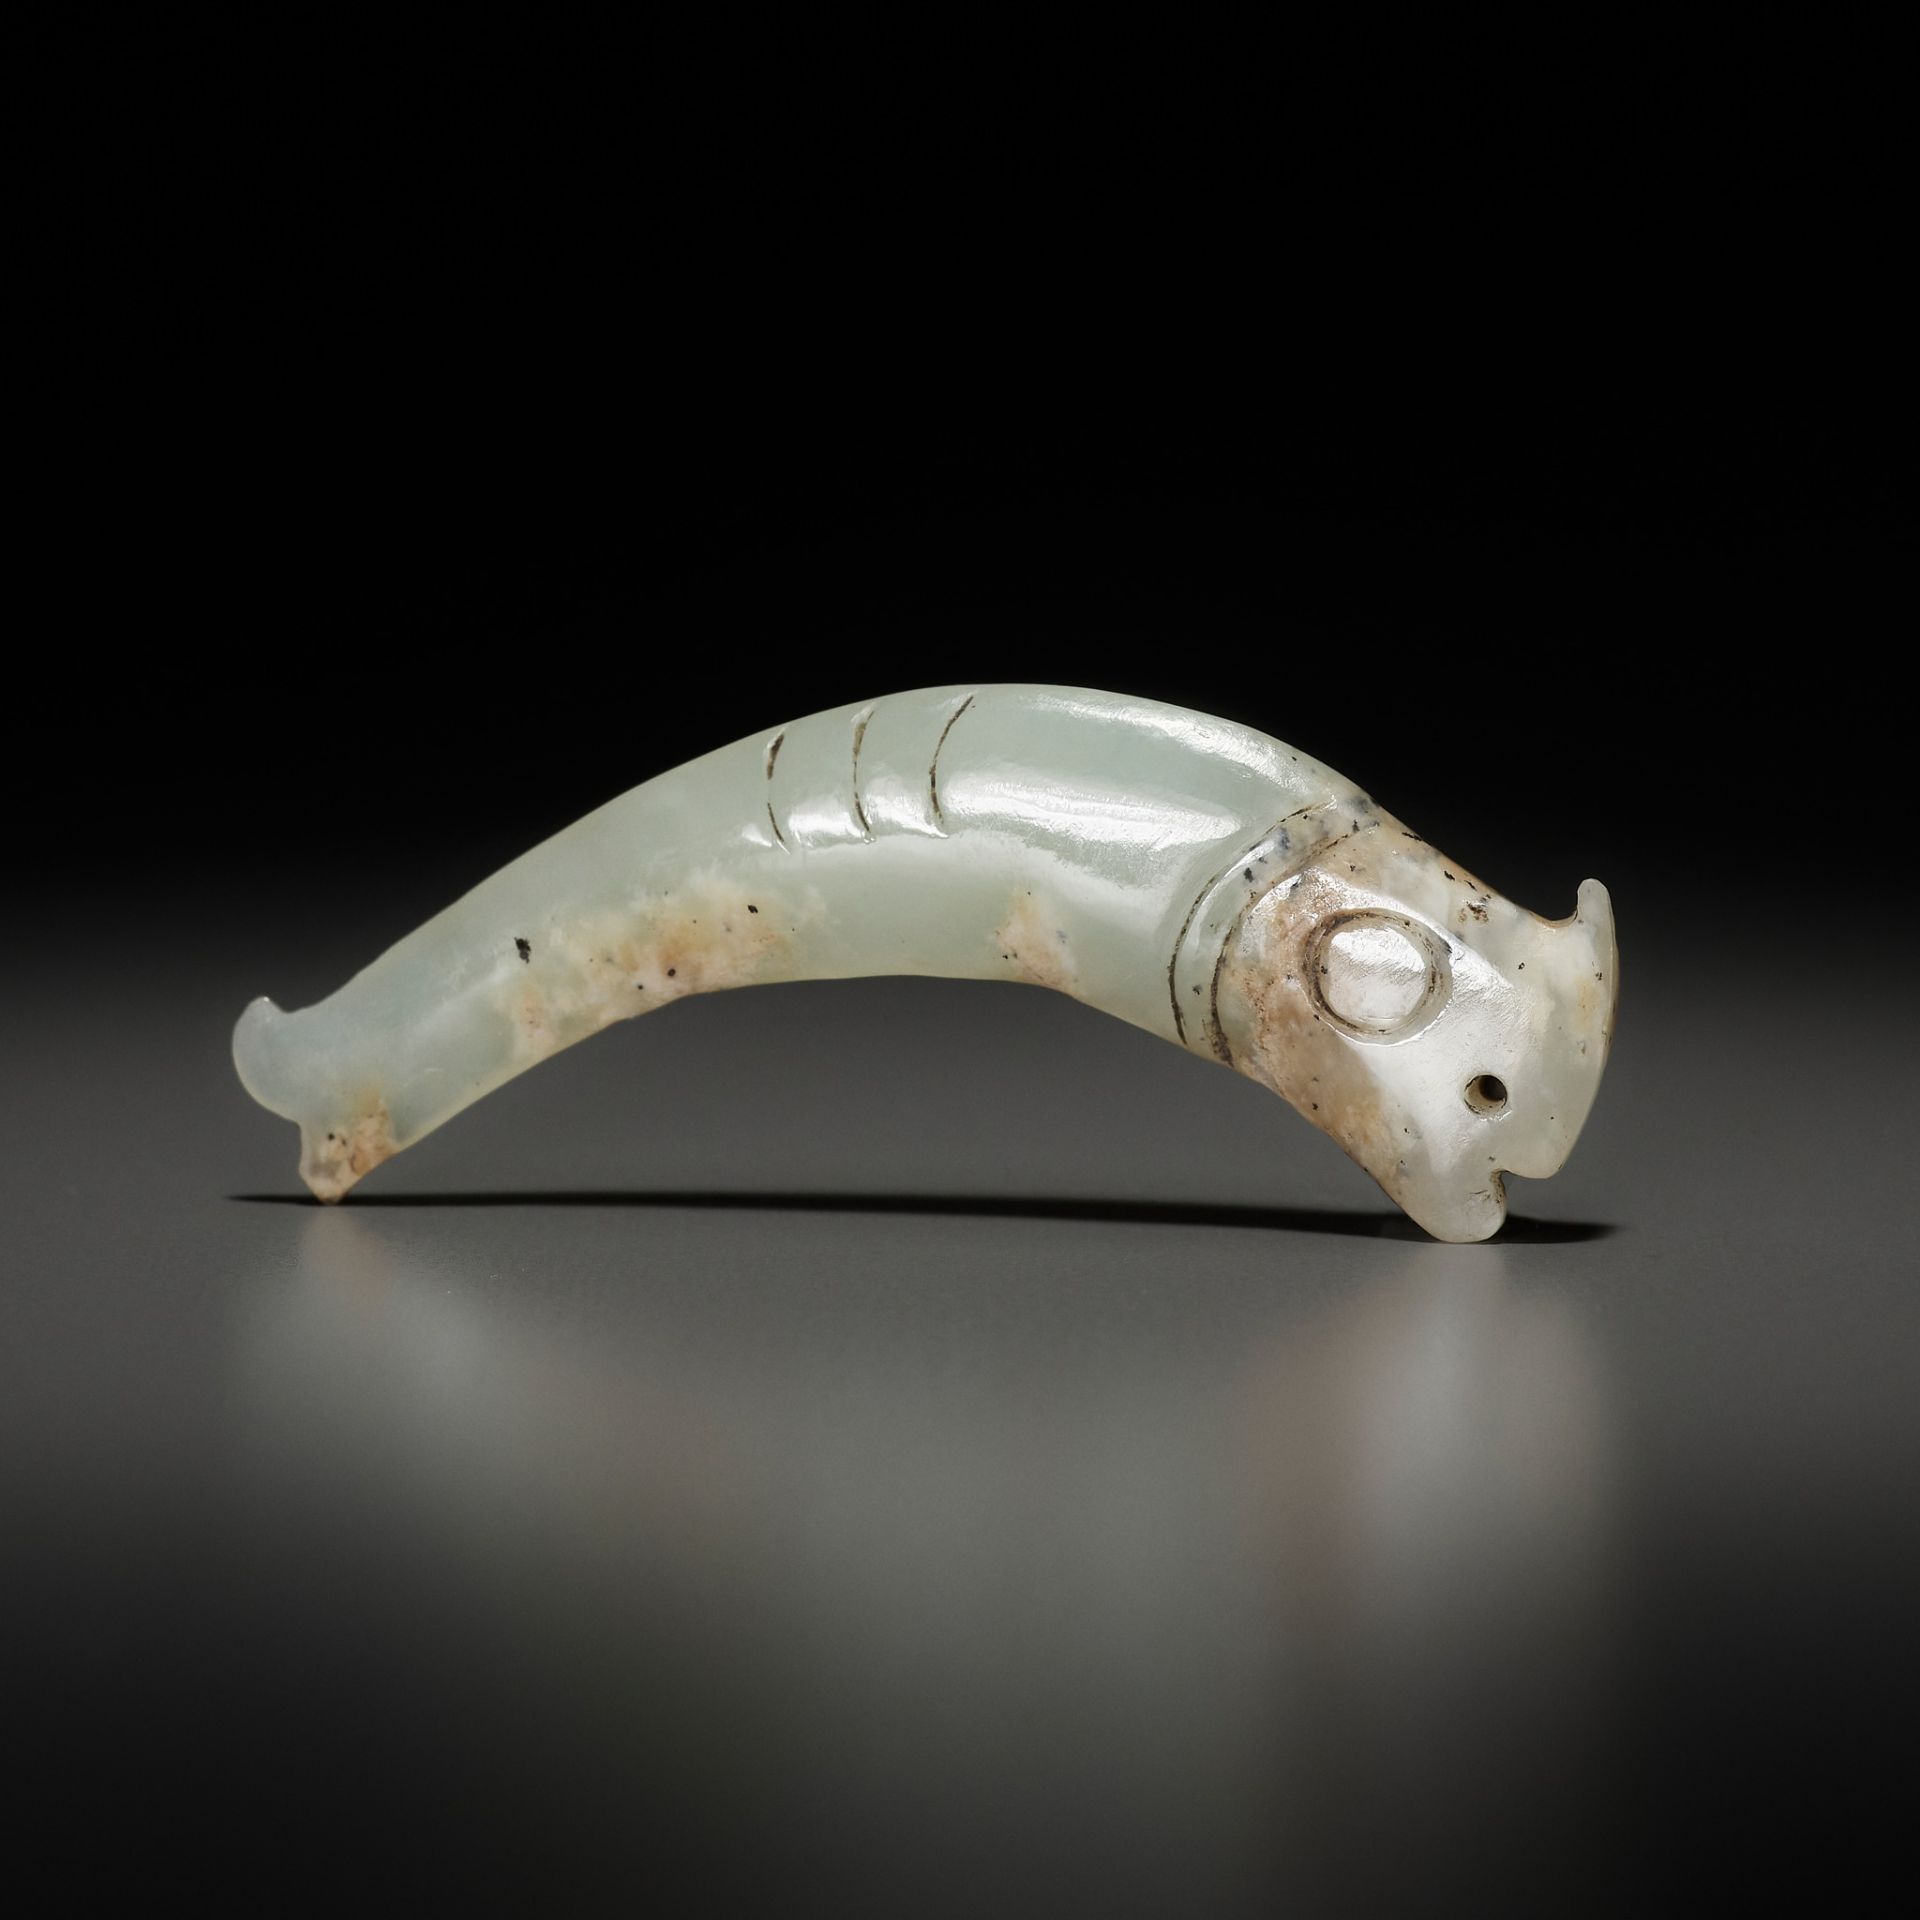 A PALE CELADON 'FISH' PENDANT, LATE SHANG TO EARLY WESTERN ZHOU DYNASTY